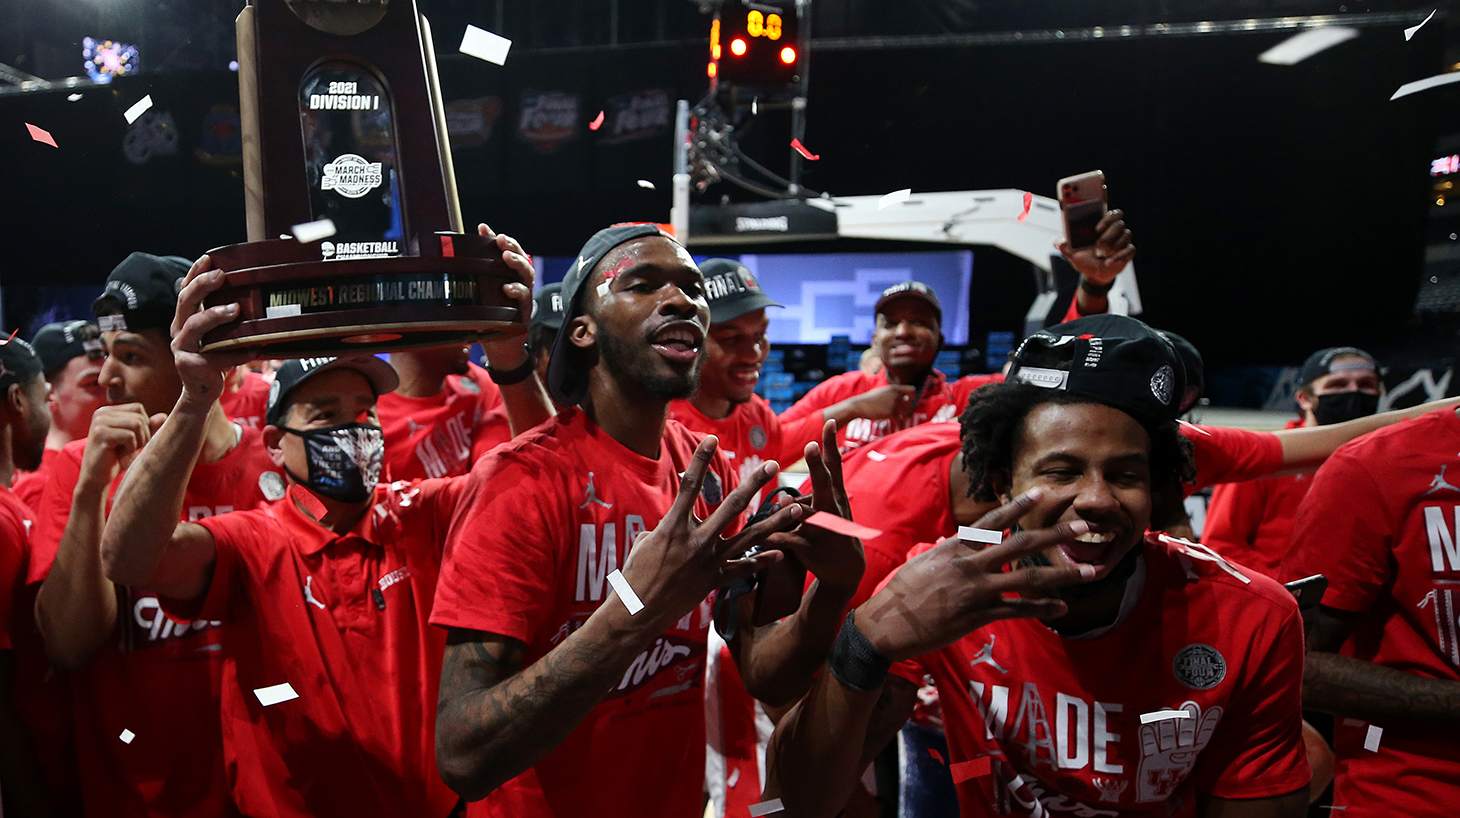 The Houston Cougars celebrate after defeating the Oregon State Beavers in the Elite Eight round of the 2021 NCAA Men's Basketball Tournament at Lucas Oil Stadium on March 29, 2021 in Indianapolis, Indiana